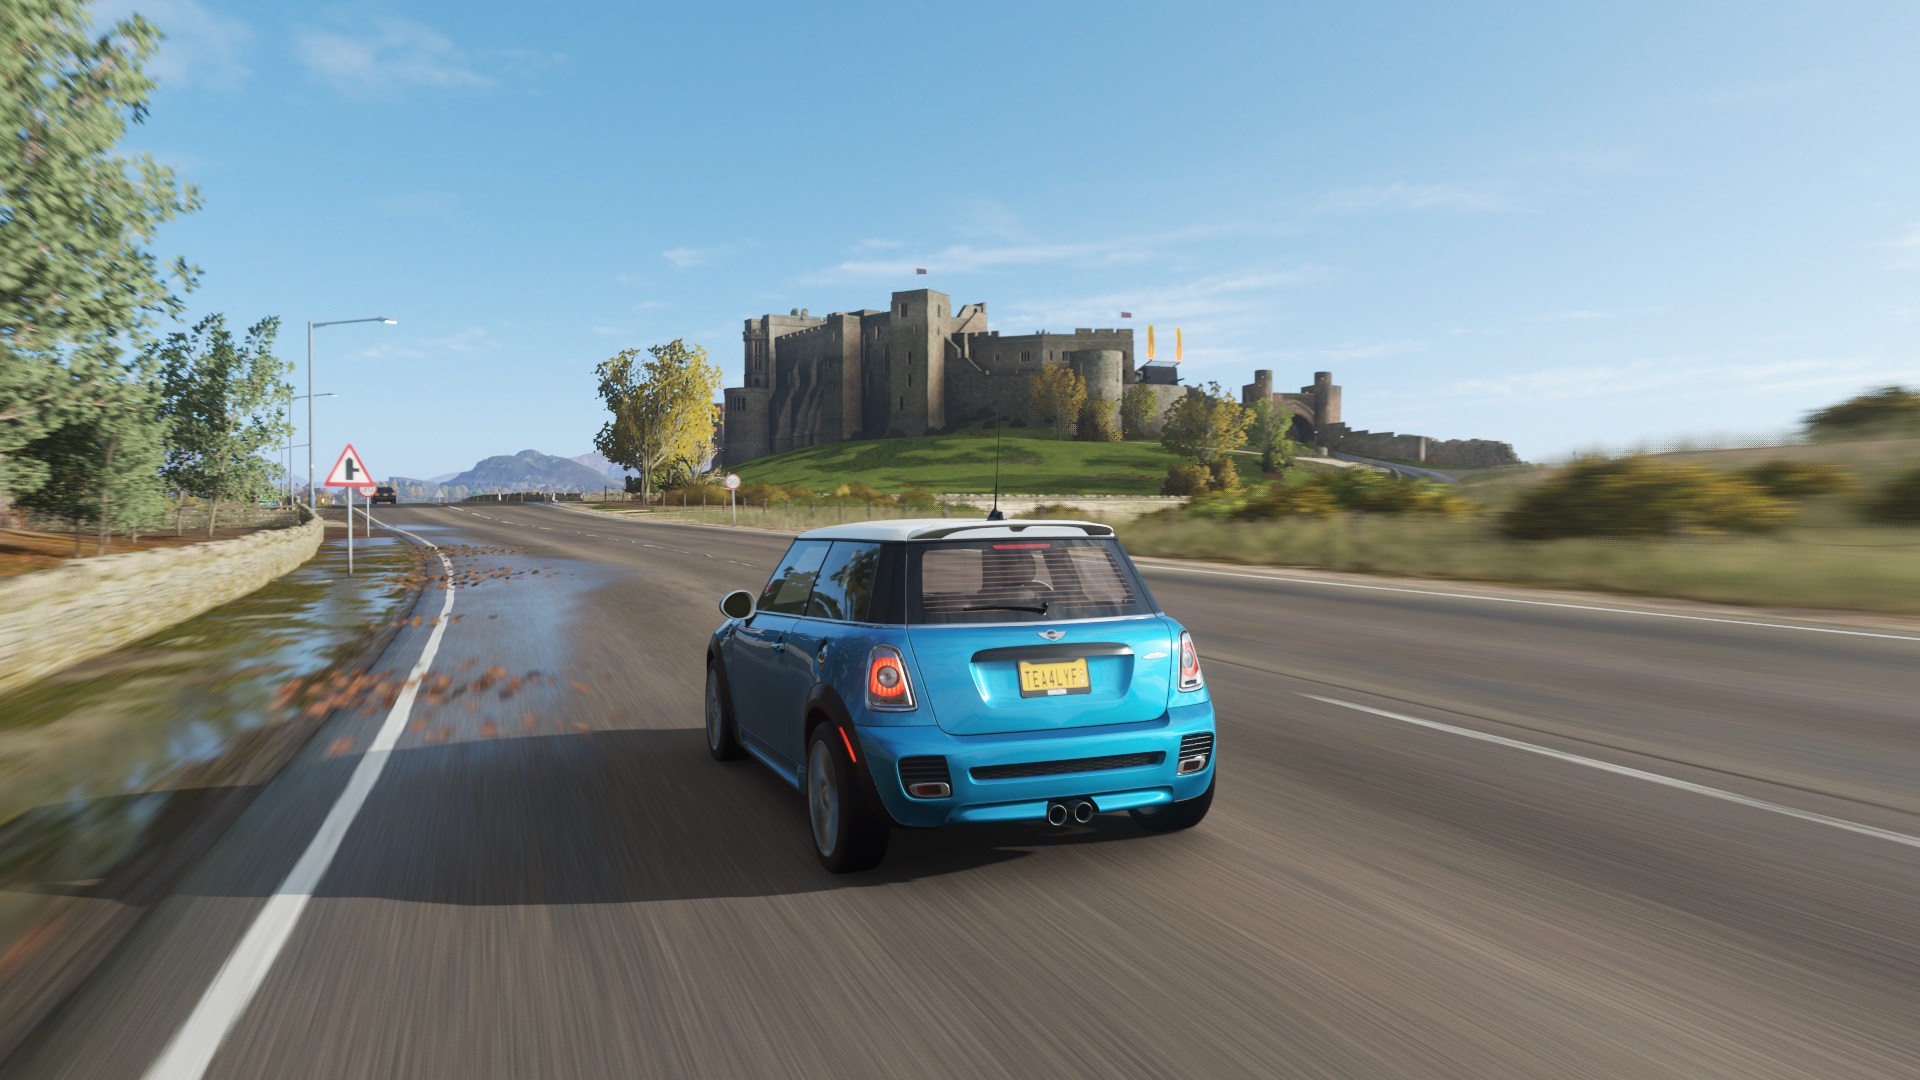 Forza Horizon 4 is staying on digital storefronts, breaking an unfortunate  series tradition